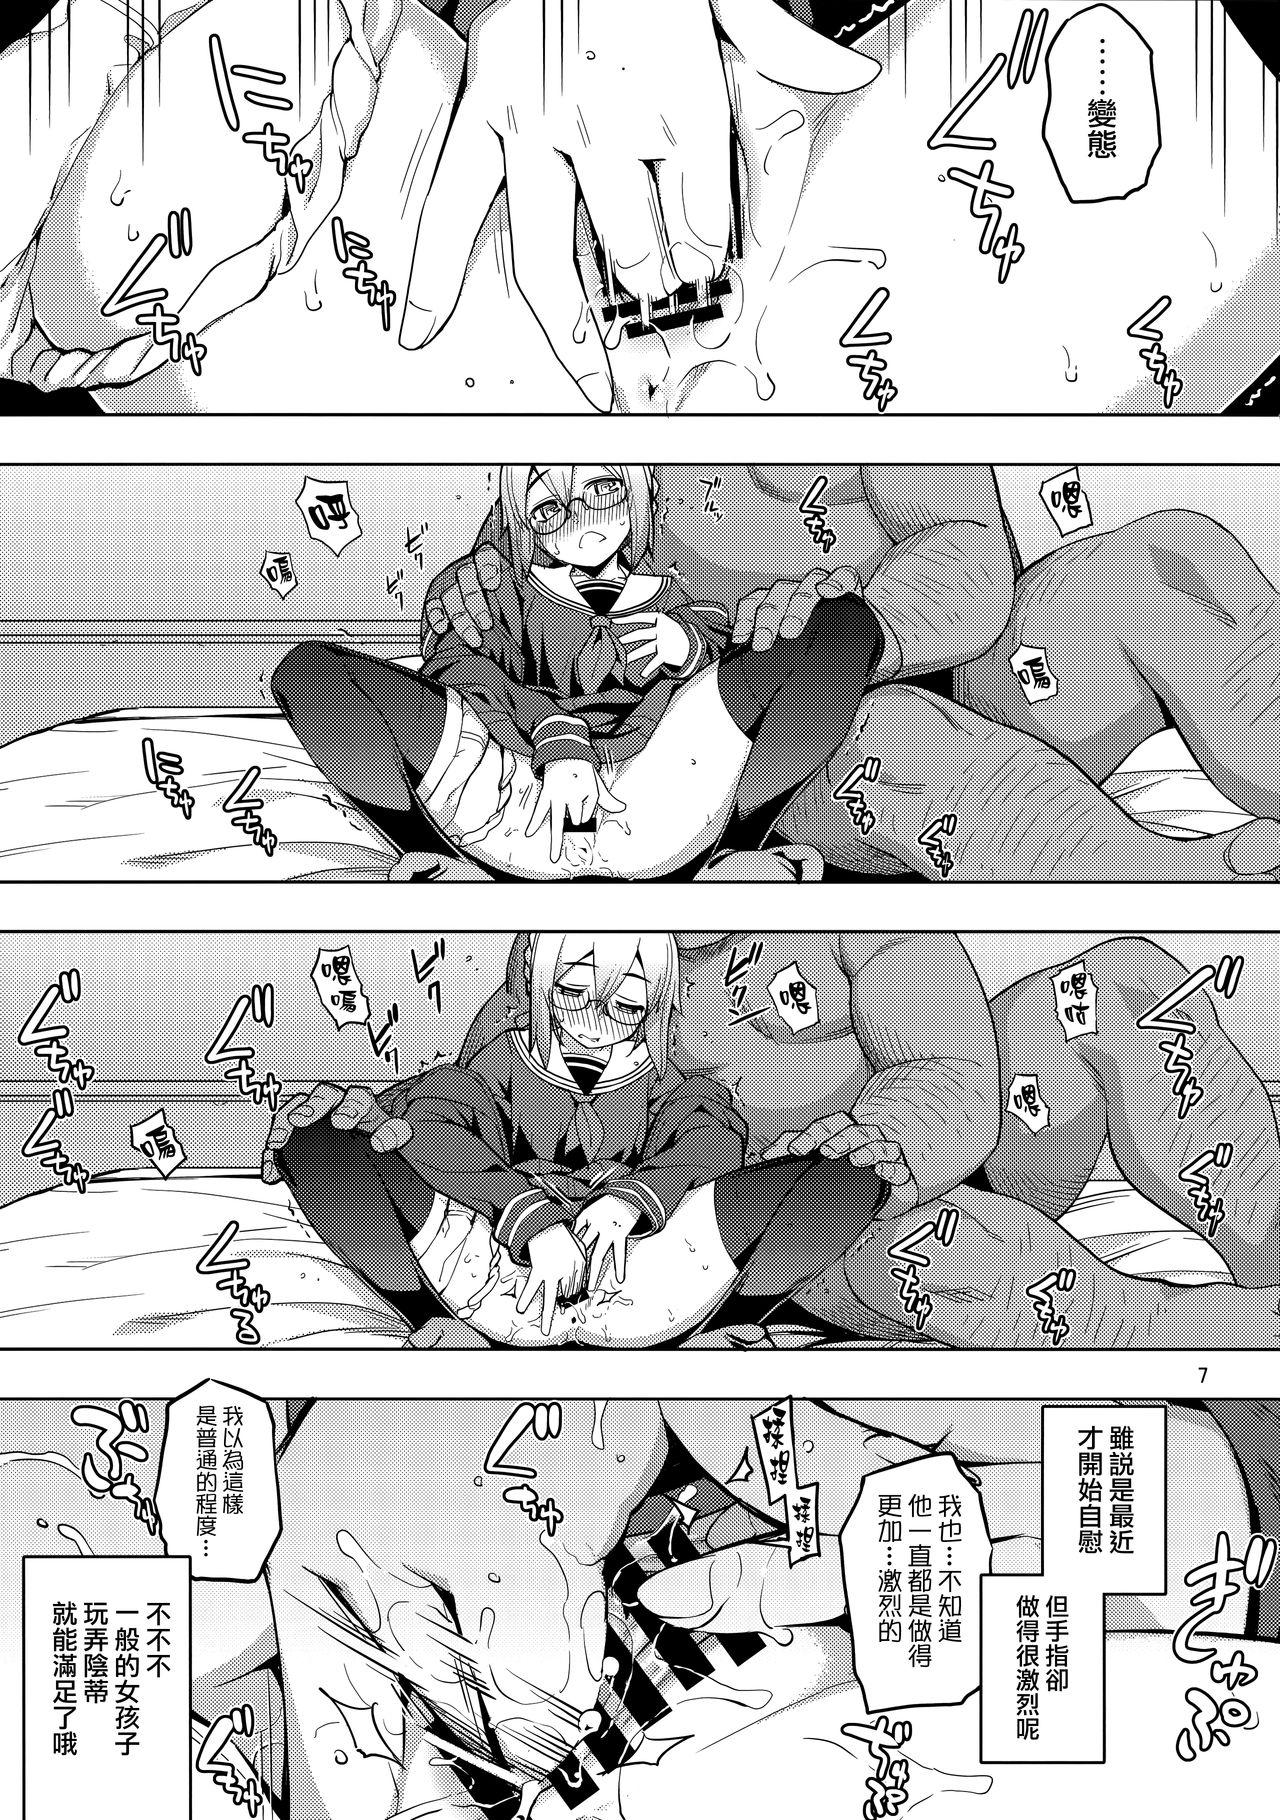 Fishnet RE26 - Fate grand order Girl On Girl - Page 6